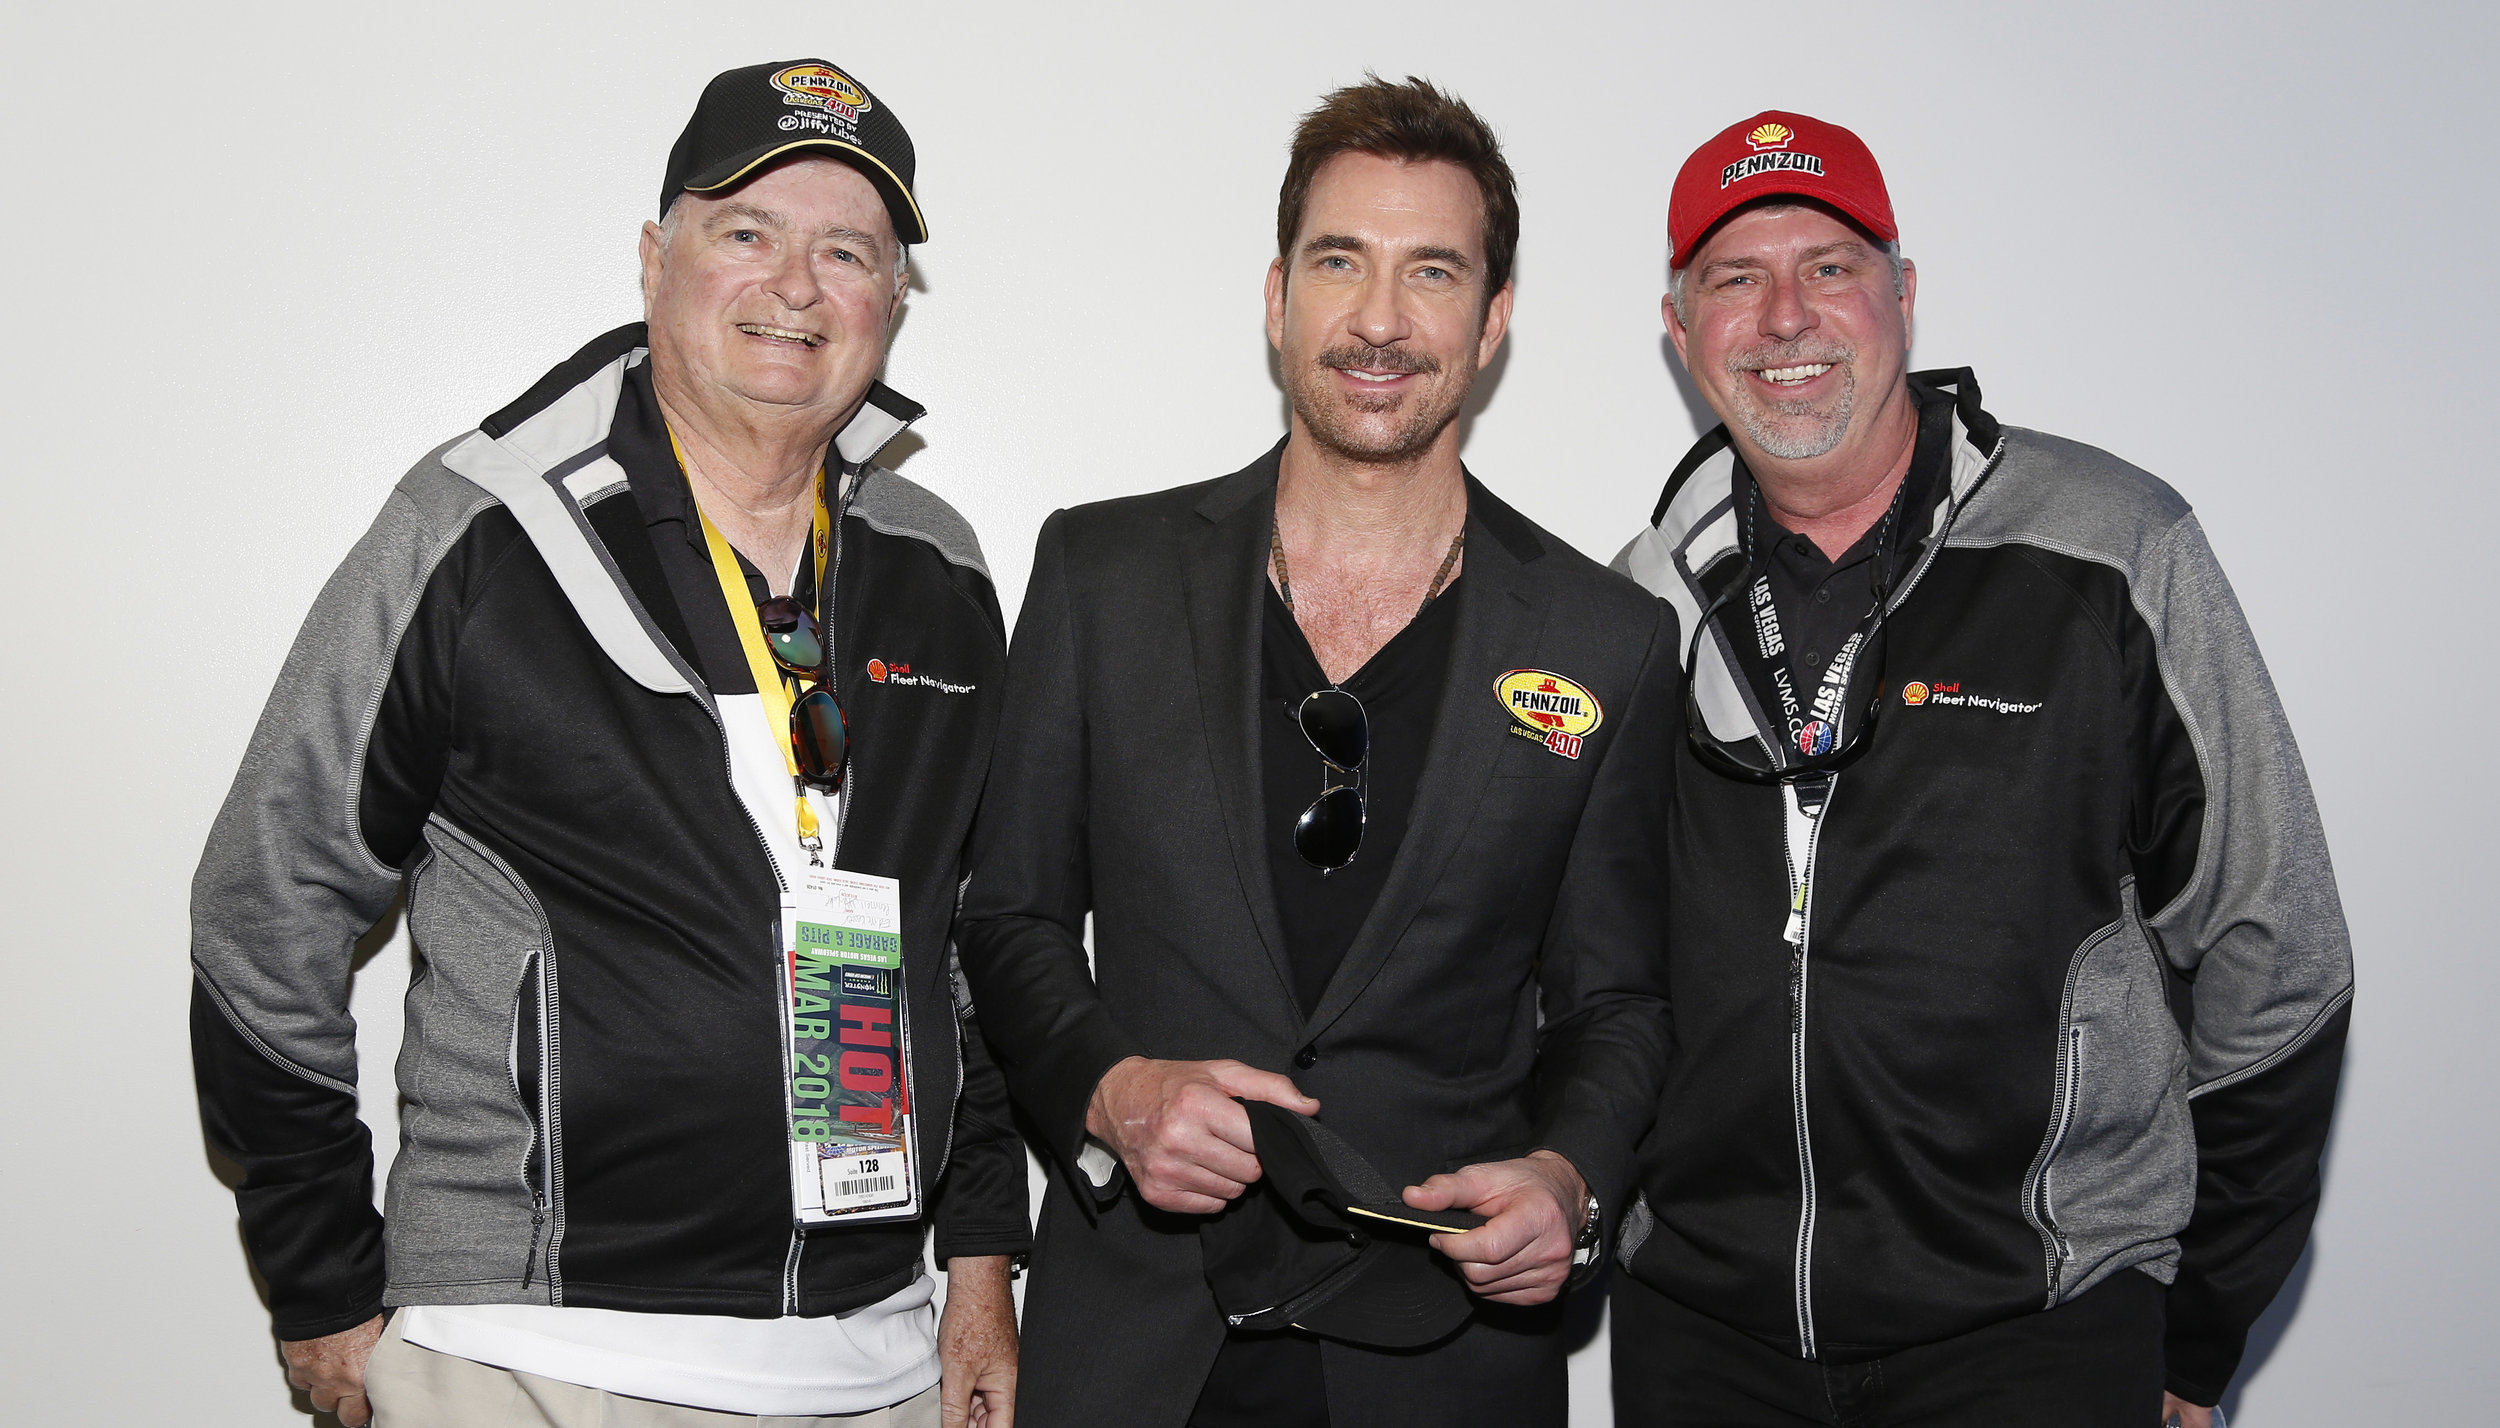 Dylan McDermott meets with guests